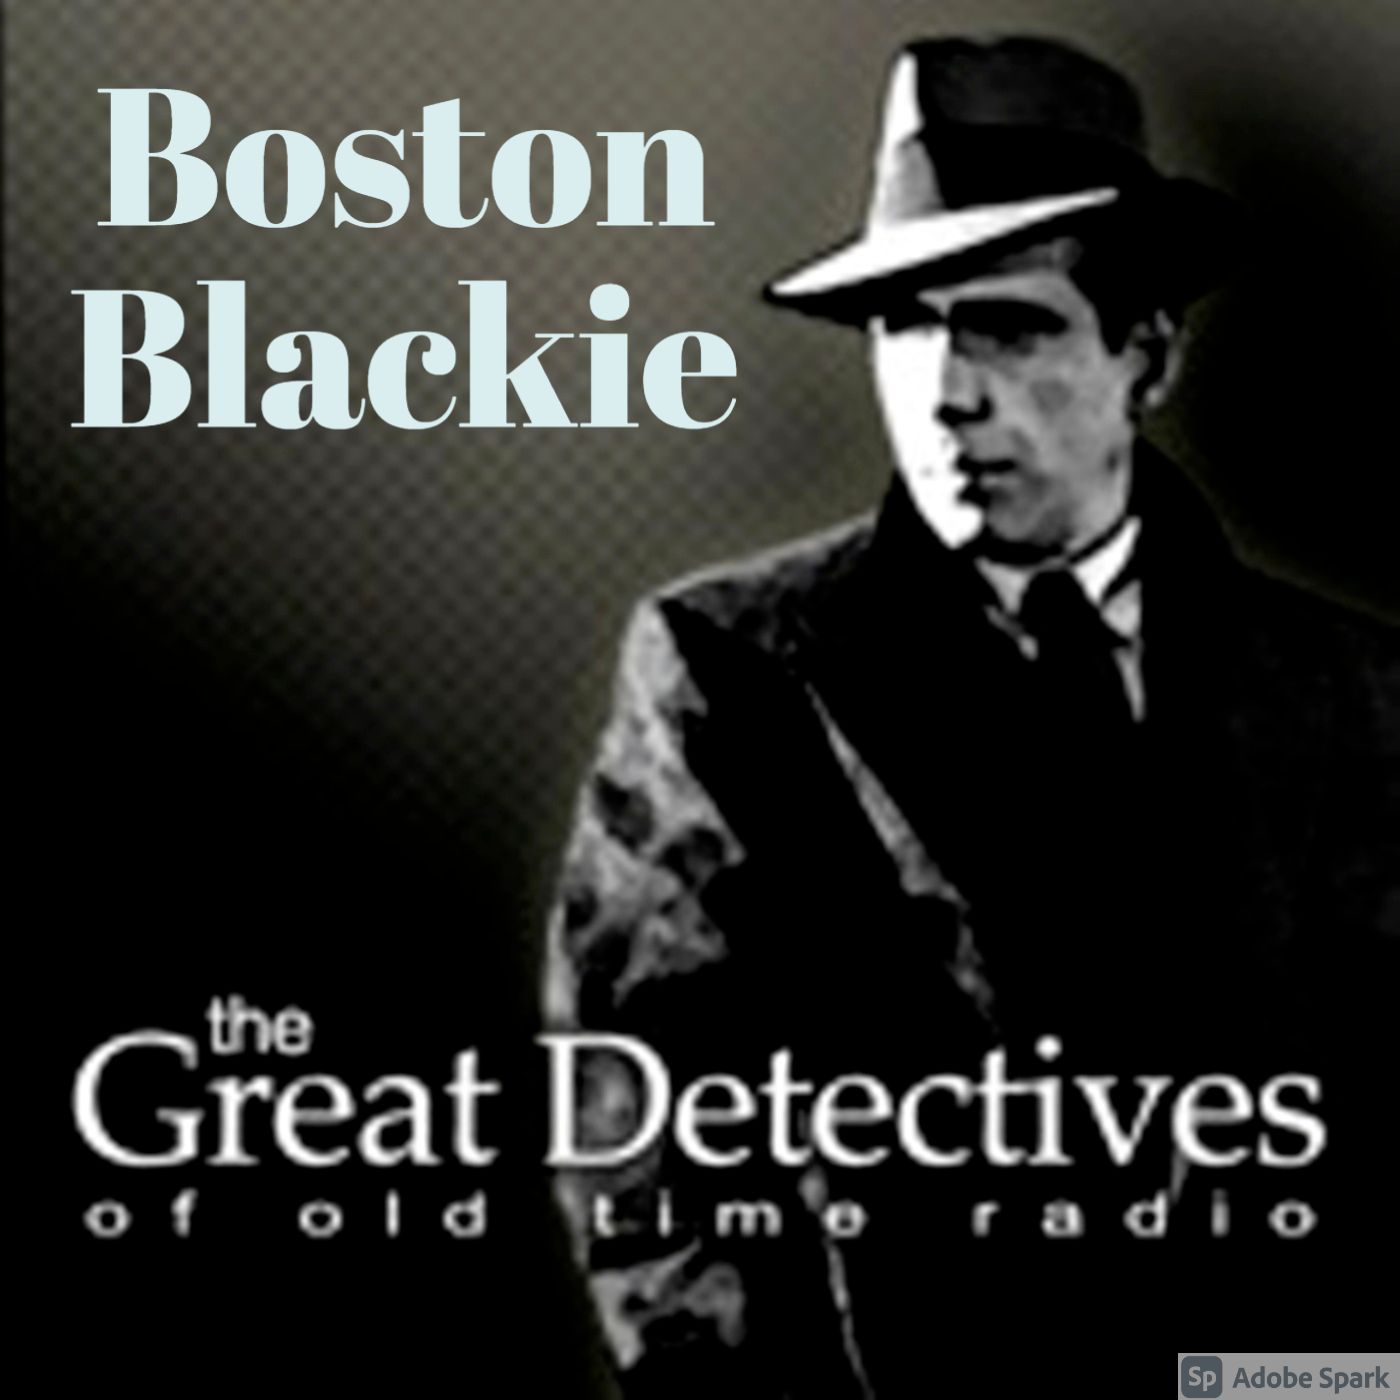 Boston Blackie – The Great Detectives of Old Time Radio